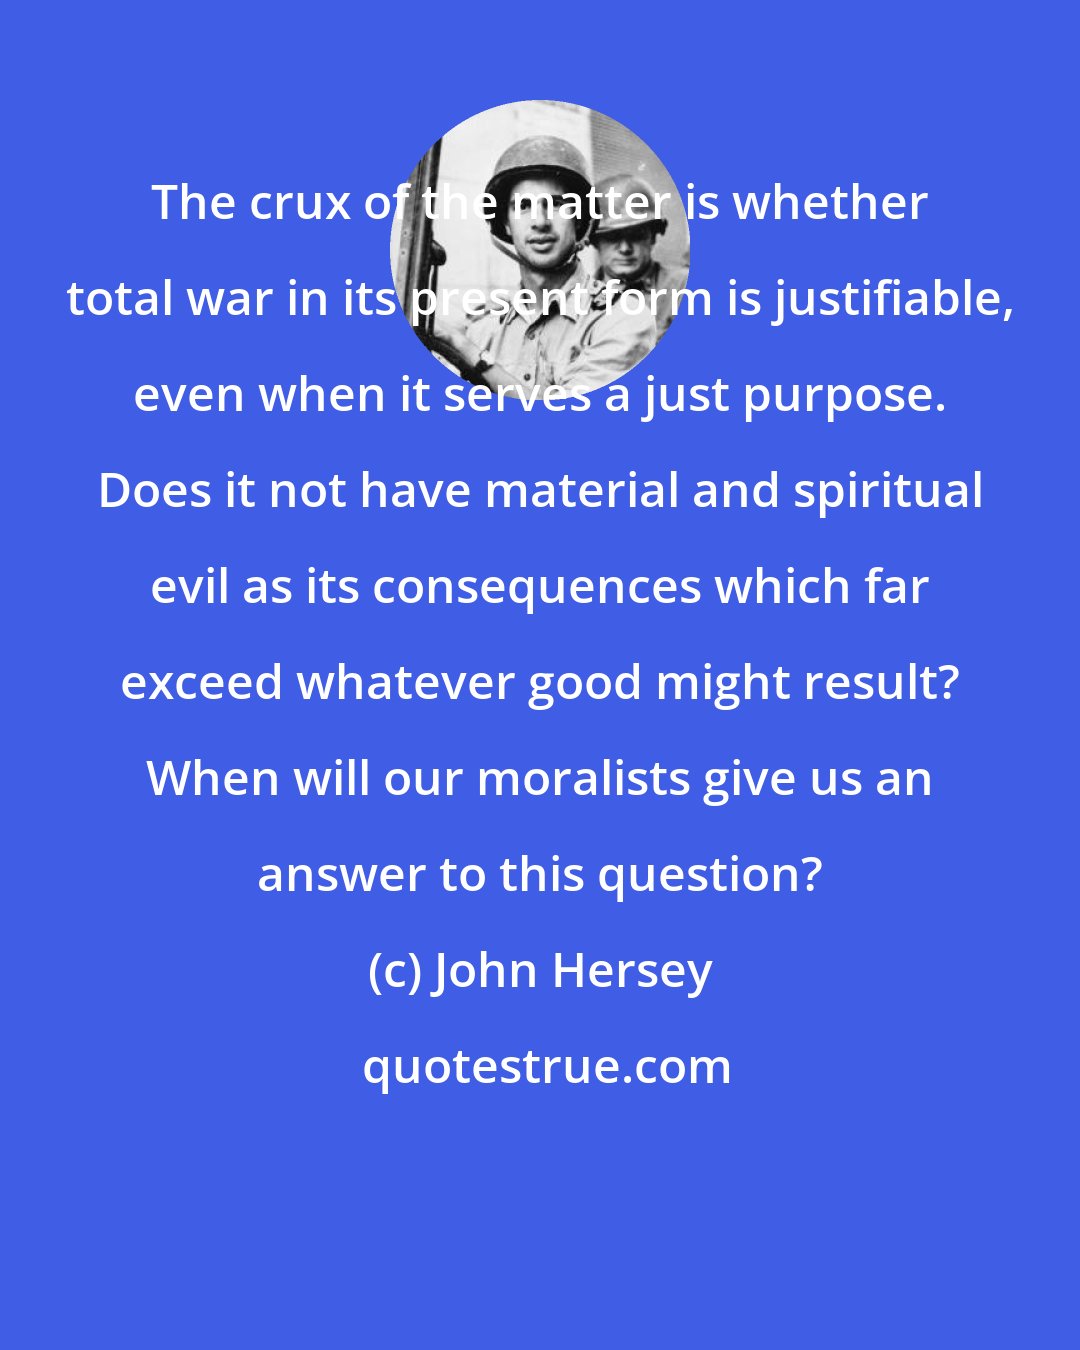 John Hersey: The crux of the matter is whether total war in its present form is justifiable, even when it serves a just purpose. Does it not have material and spiritual evil as its consequences which far exceed whatever good might result? When will our moralists give us an answer to this question?